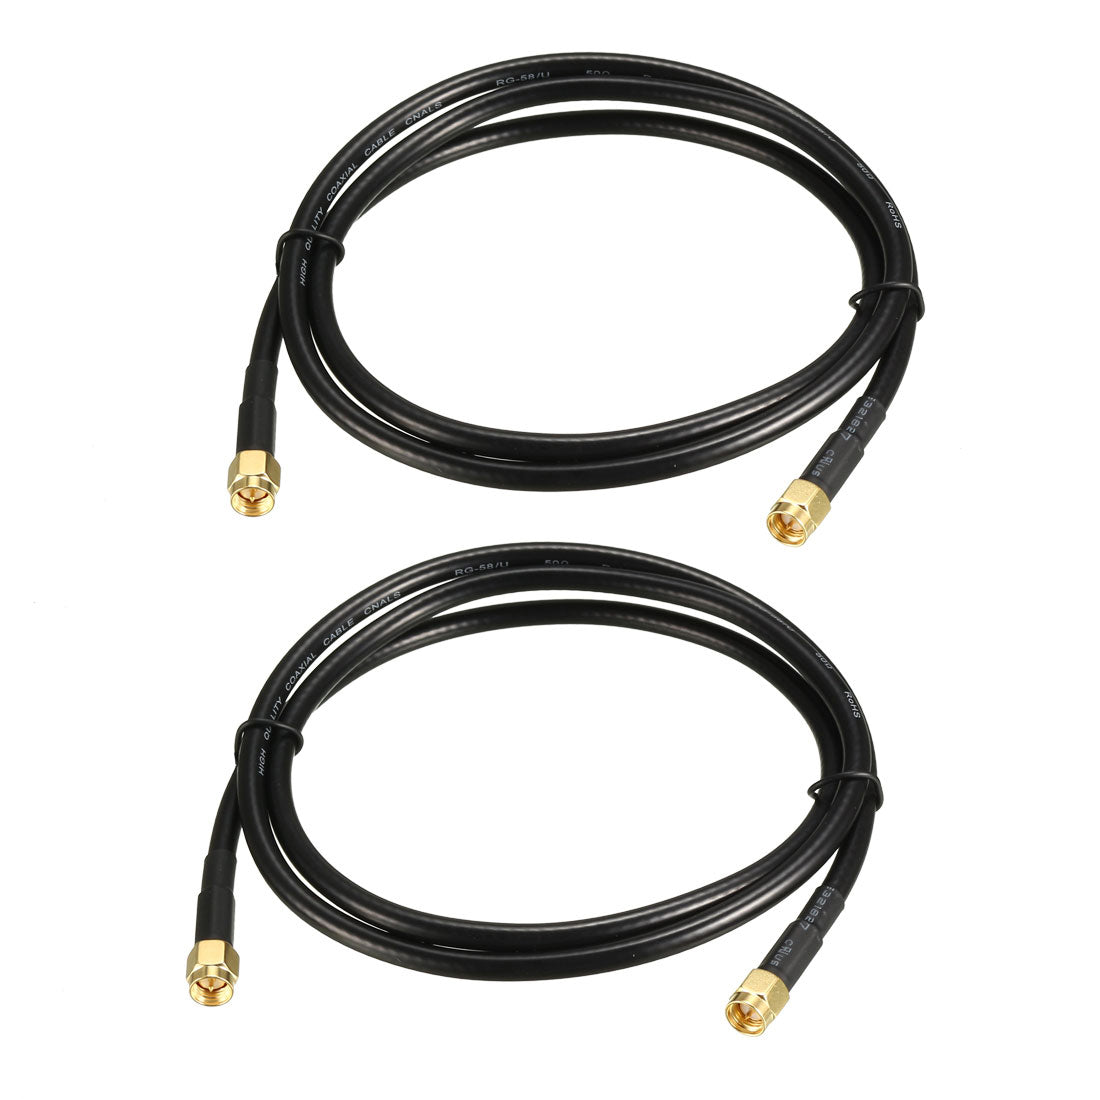 uxcell Uxcell Antenna Extension Cable SMA Male to SMA Male Coaxial Cable RG58 50 Ohm 2pcs